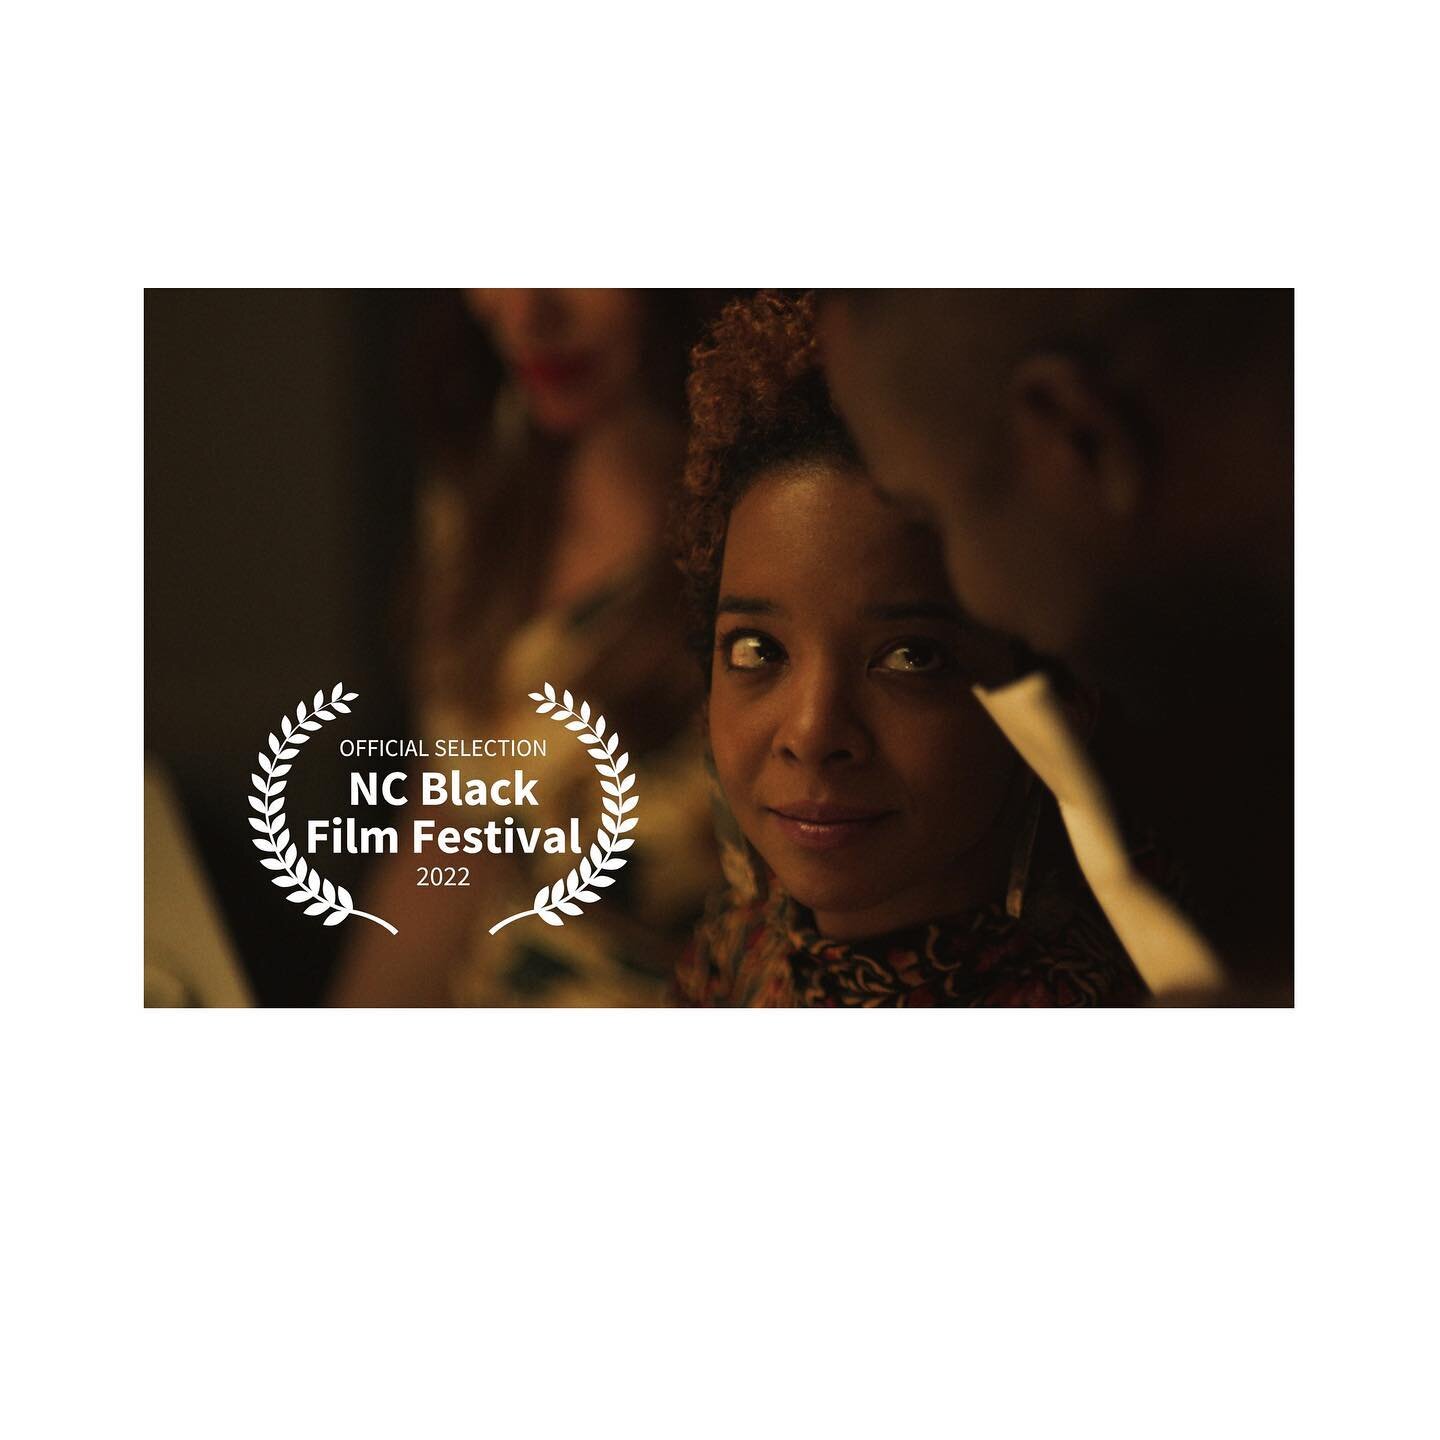 Spring Forward. Another one for the culture - we are screening in beautiful Wilmington, NC, at the NC Black Film Festival (@ncblackfilmfest) at the end of the month.⁠⁠
⁠⁠
Our IN-PERSON screening + Q&amp;A of @silentpartnerfilm will be on Saturday, Ma